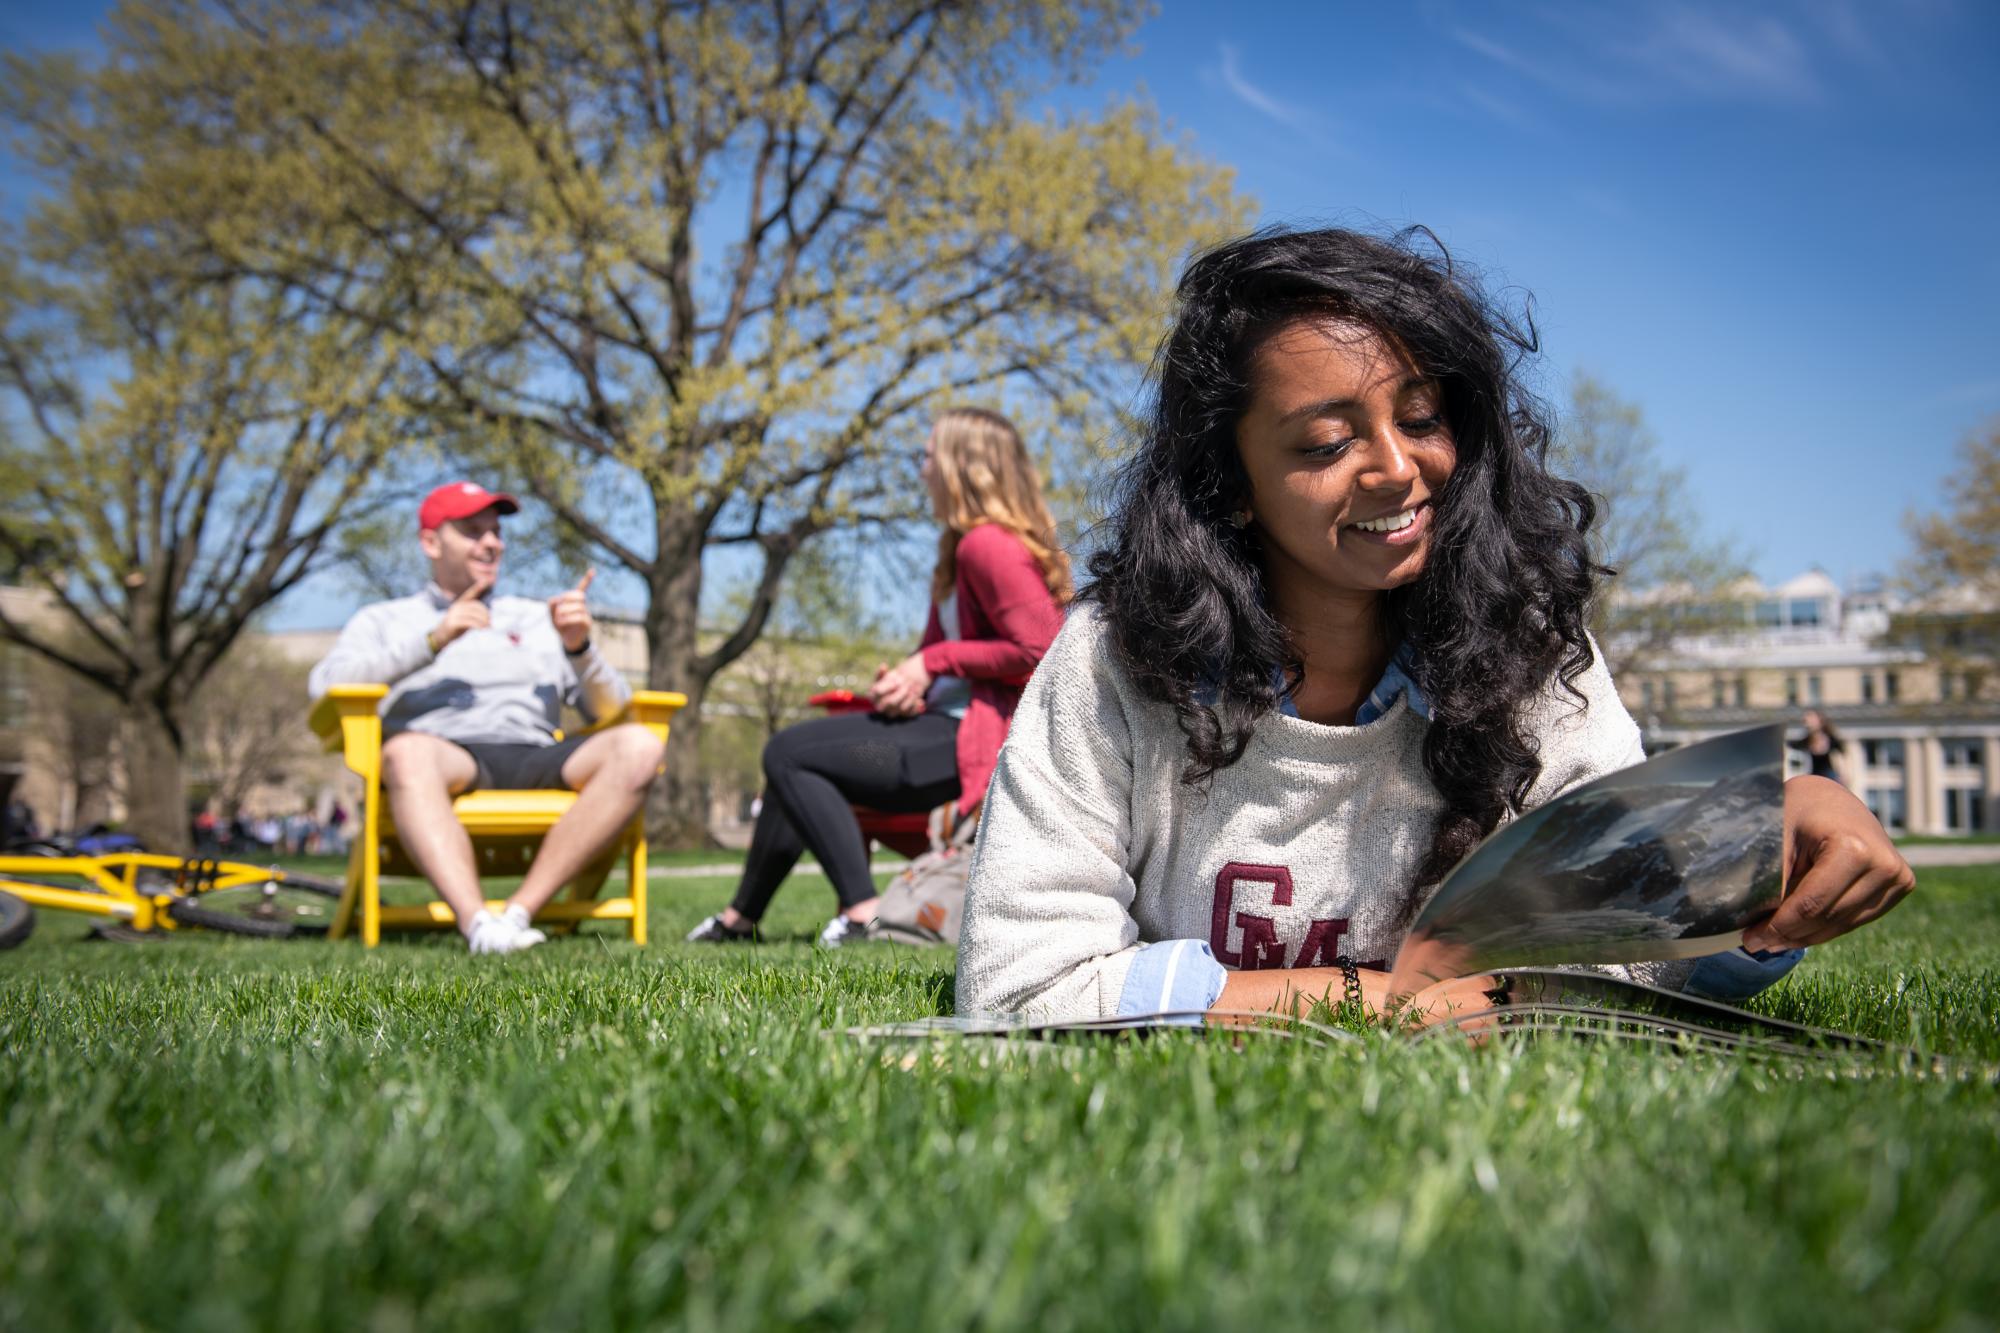 Image of CMU students in grass.